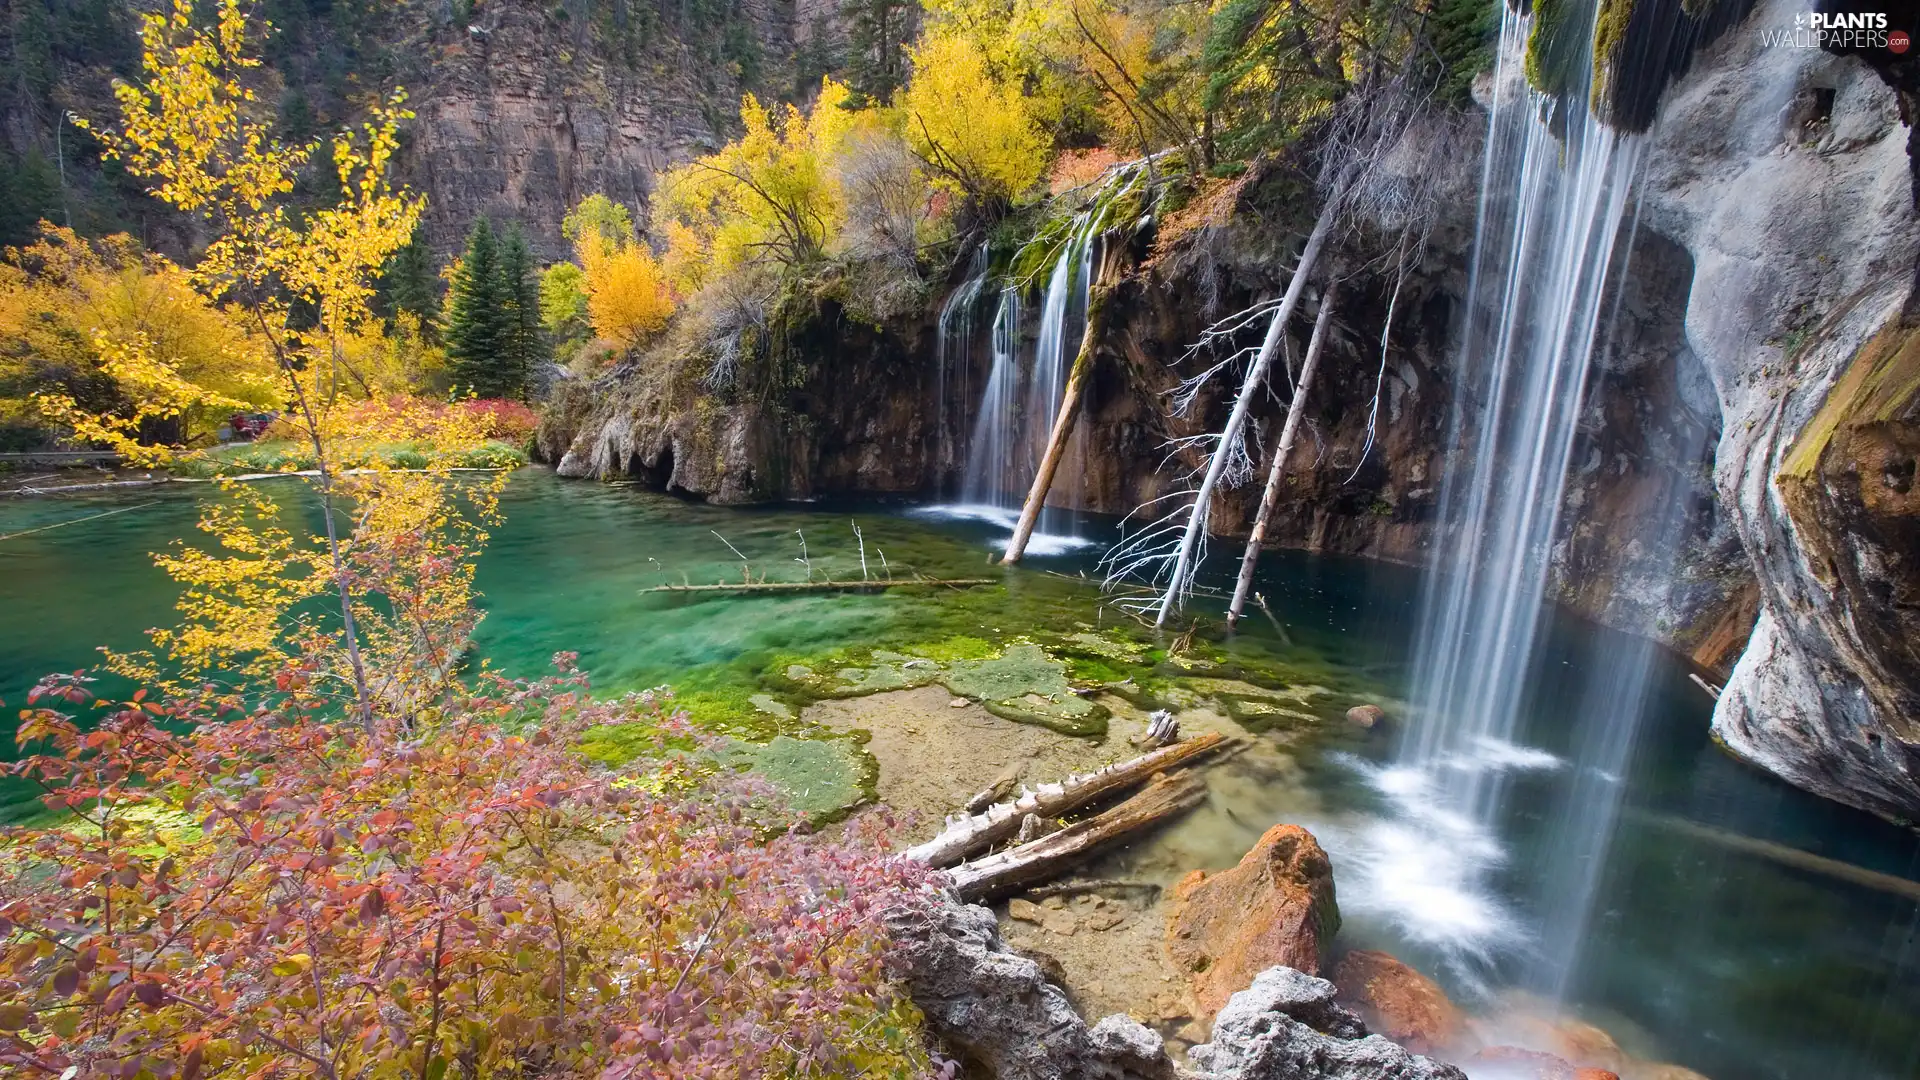 trees, waterfall, color, rocks, autumn, viewes, Leaf